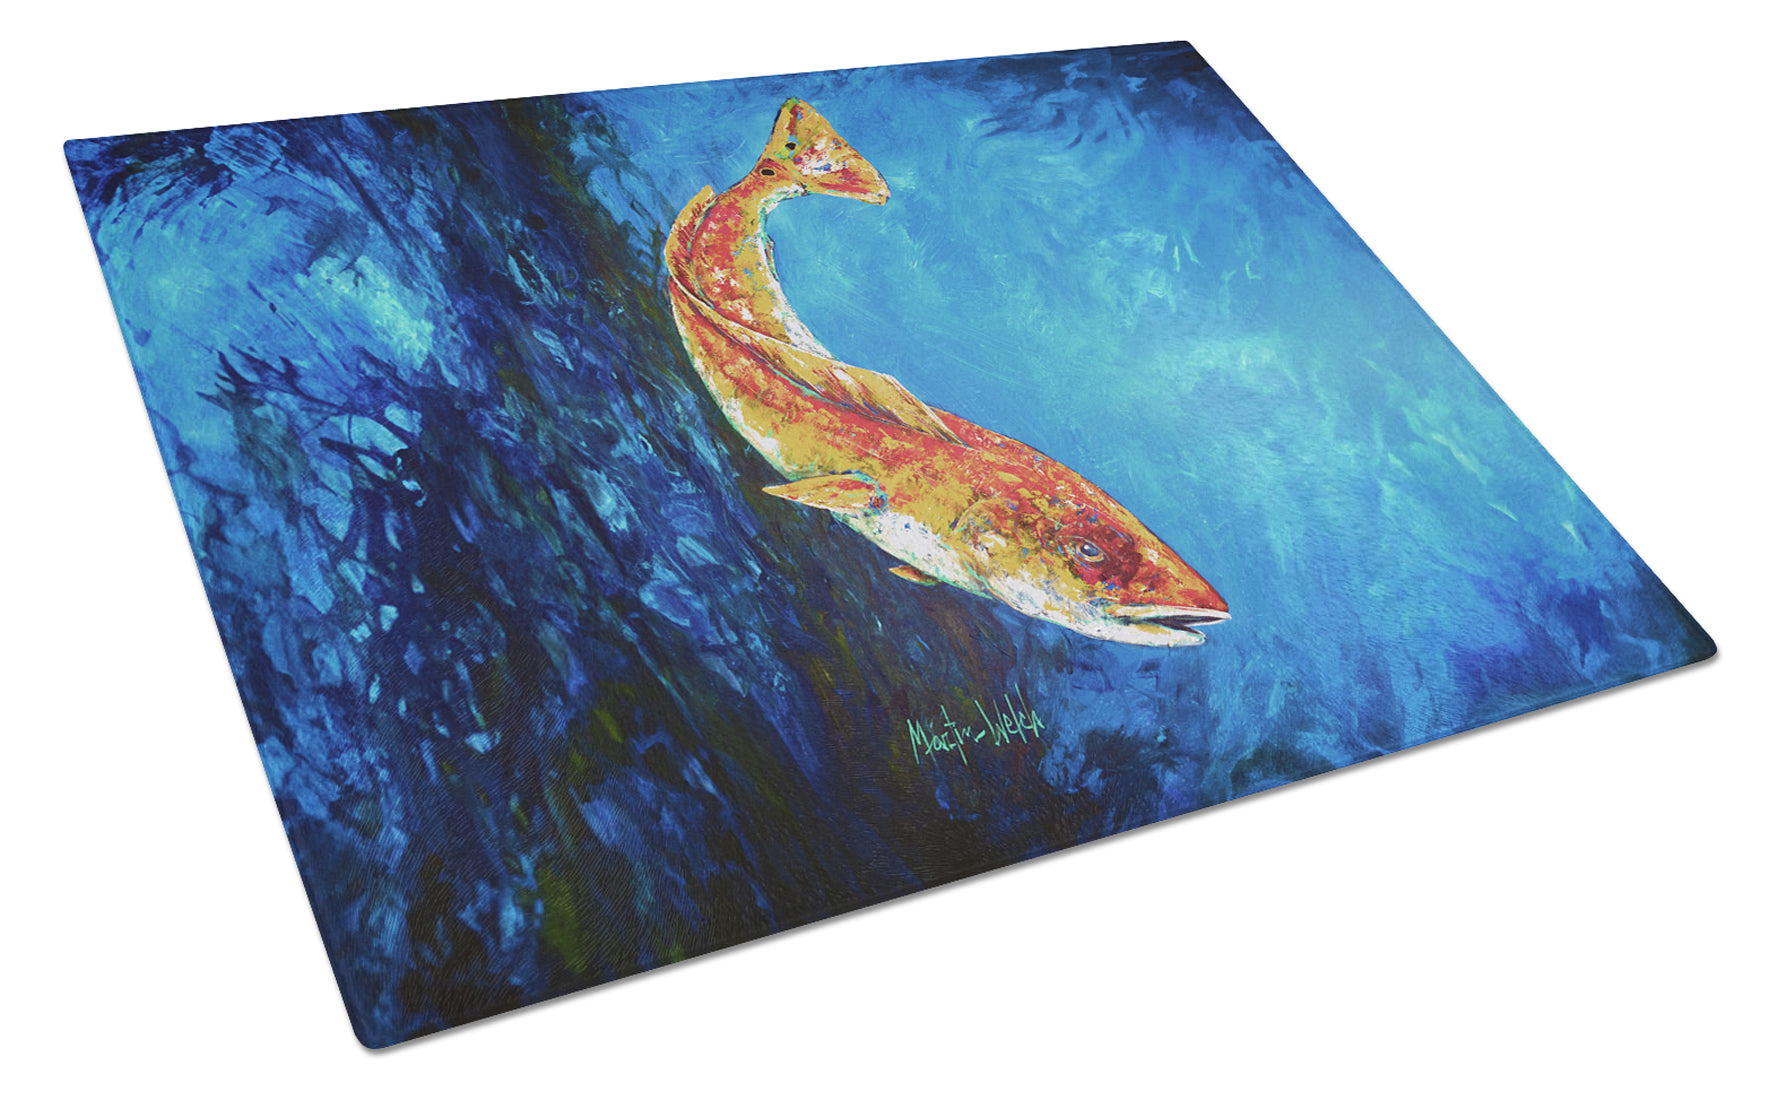 Buy this Katy Red Red Fish Glass Cutting Board